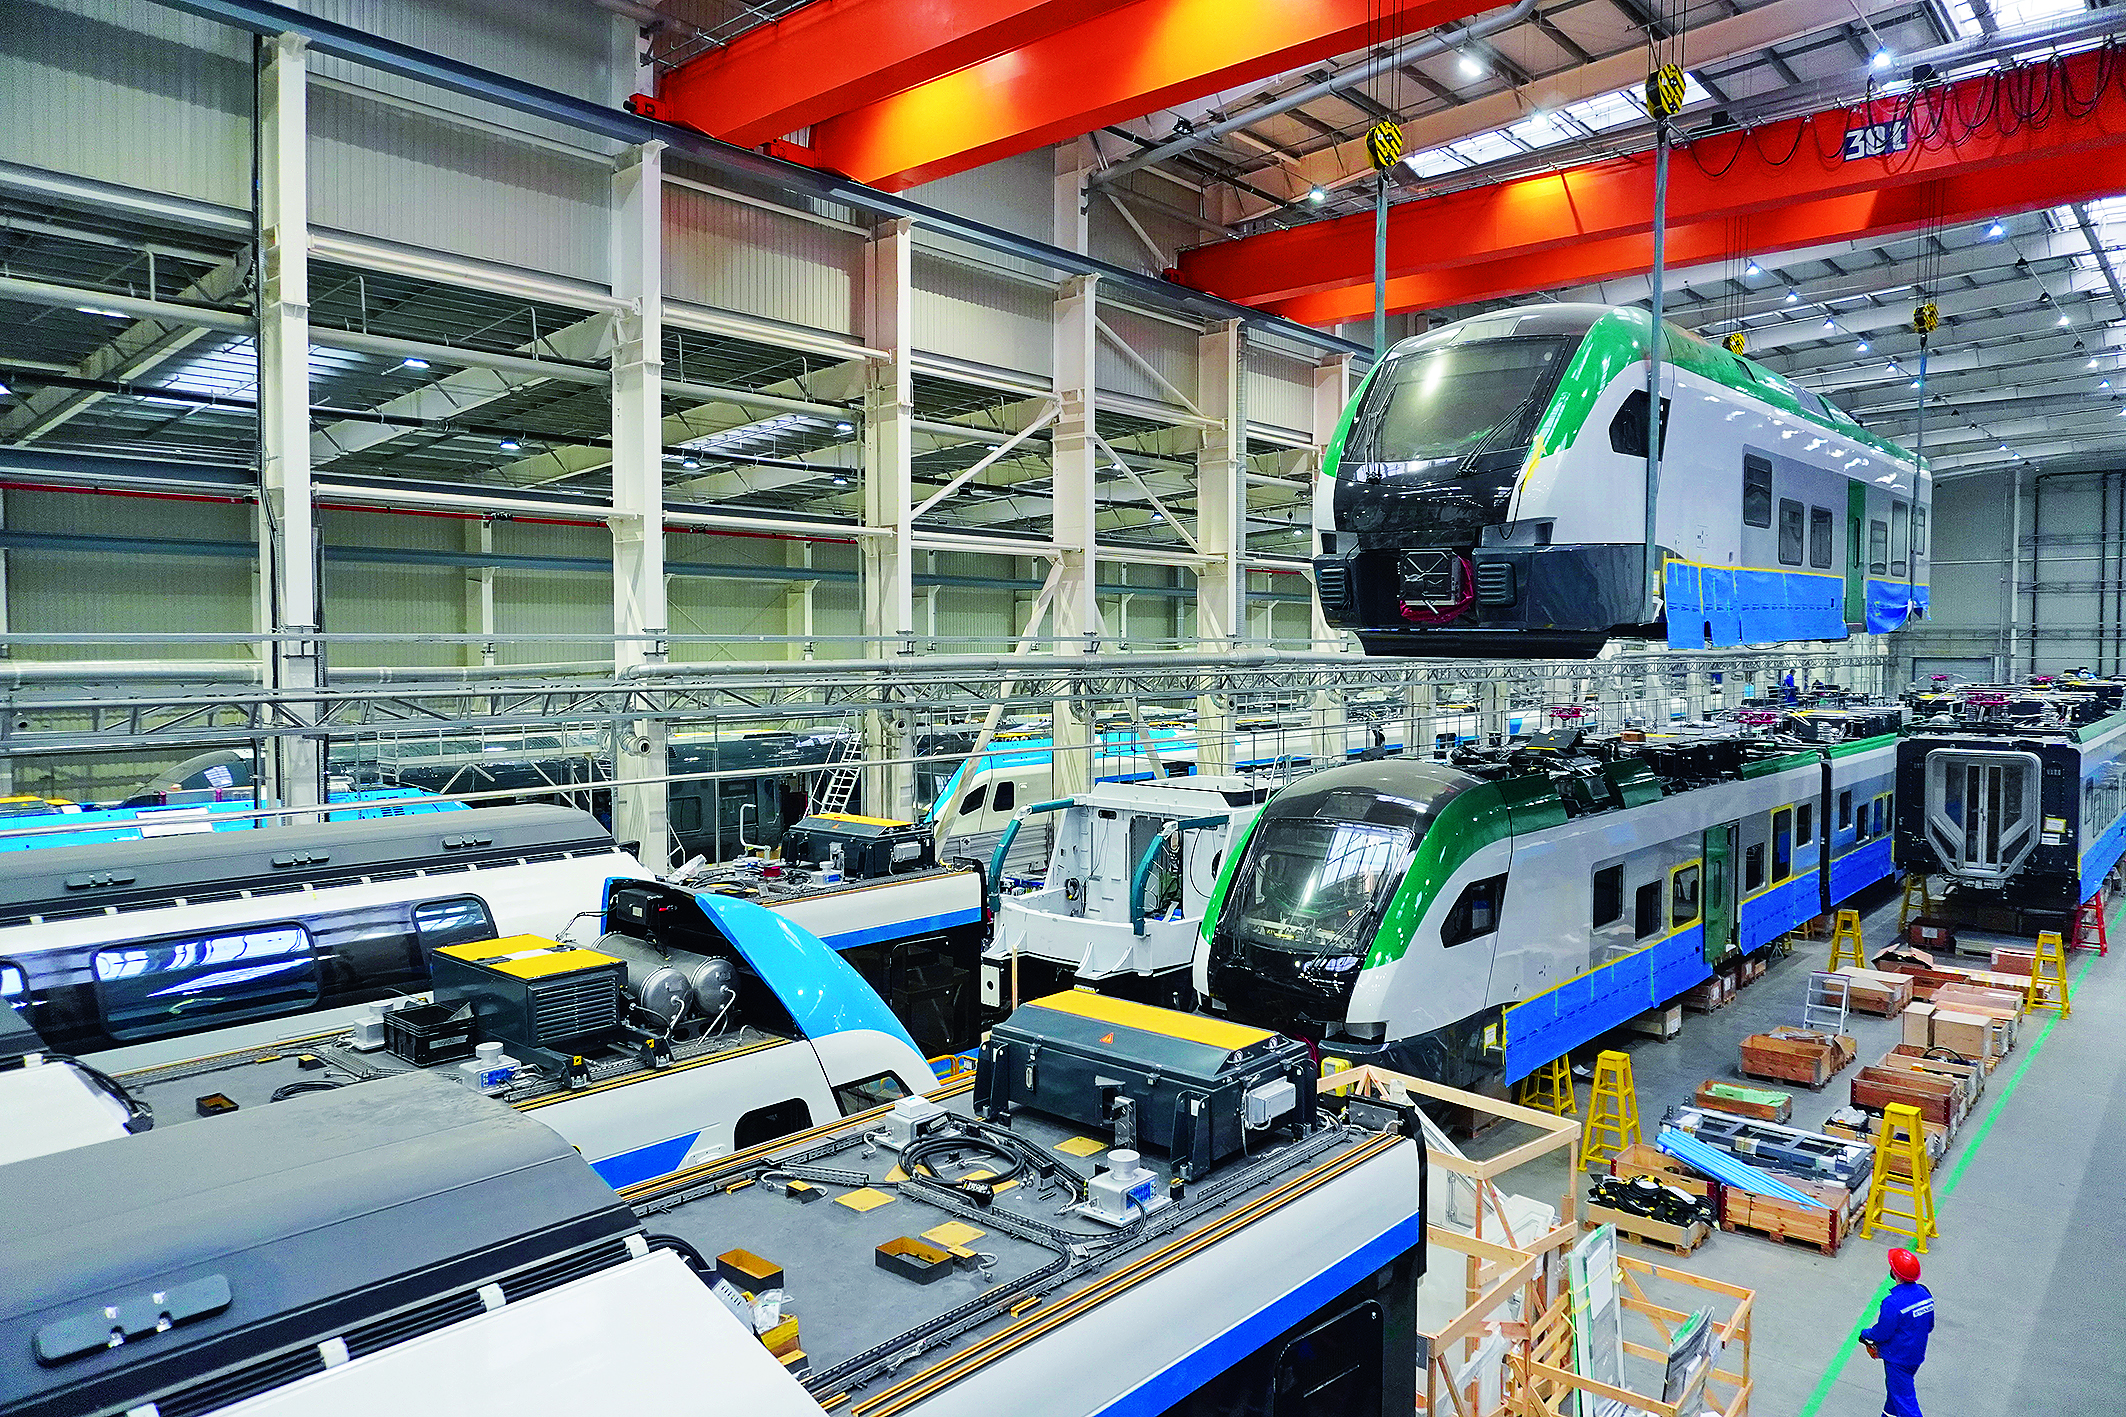 At the Stadler Rail production facility in Fanipol, Belarus